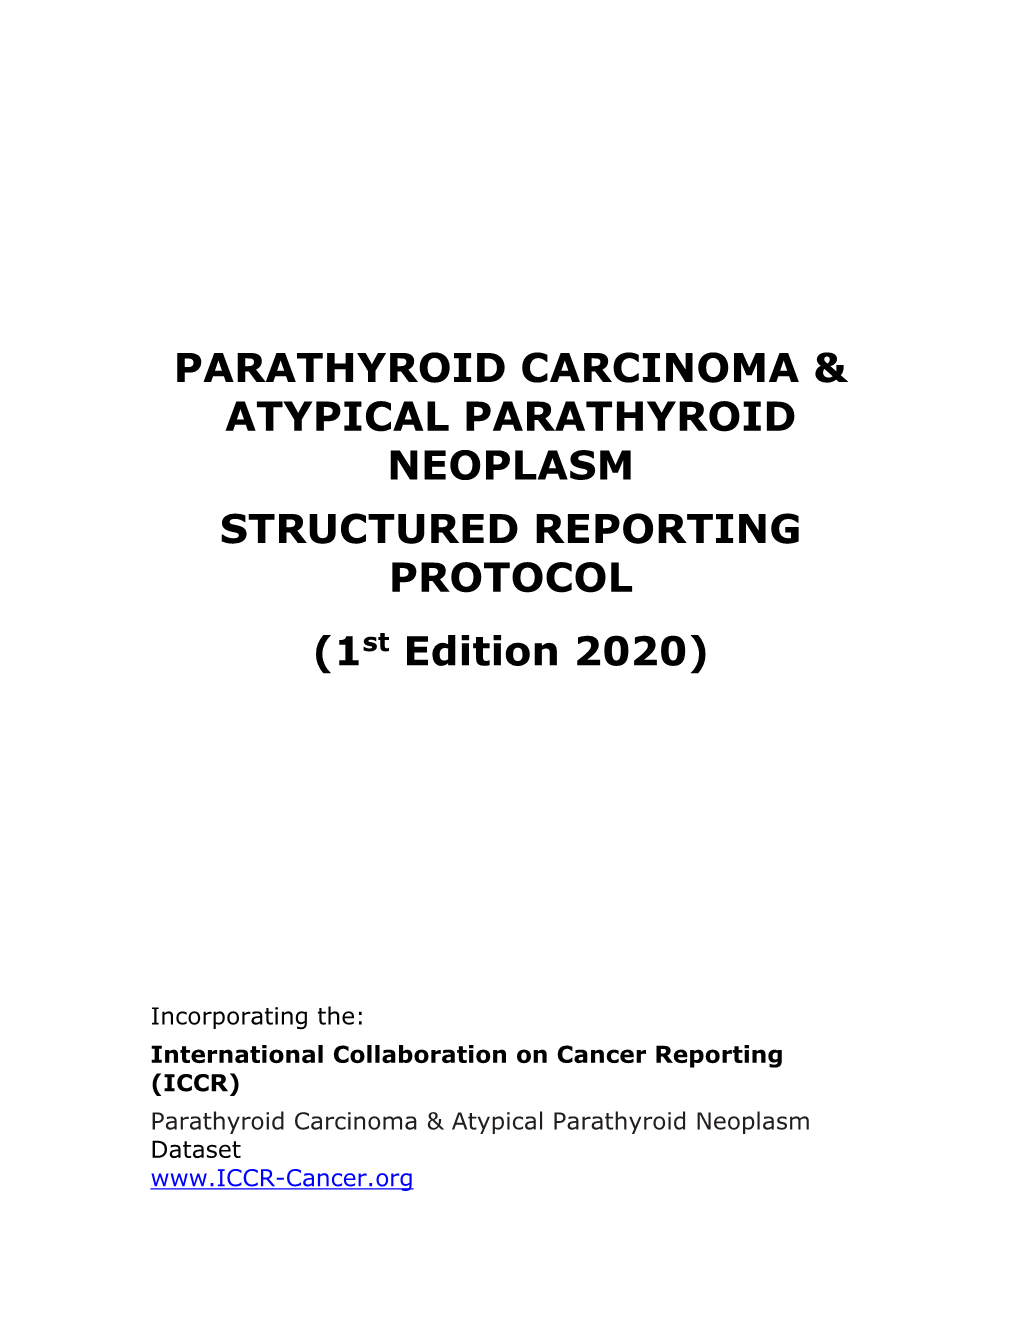 Parathyroid Cancer Structured Reporting Protocol